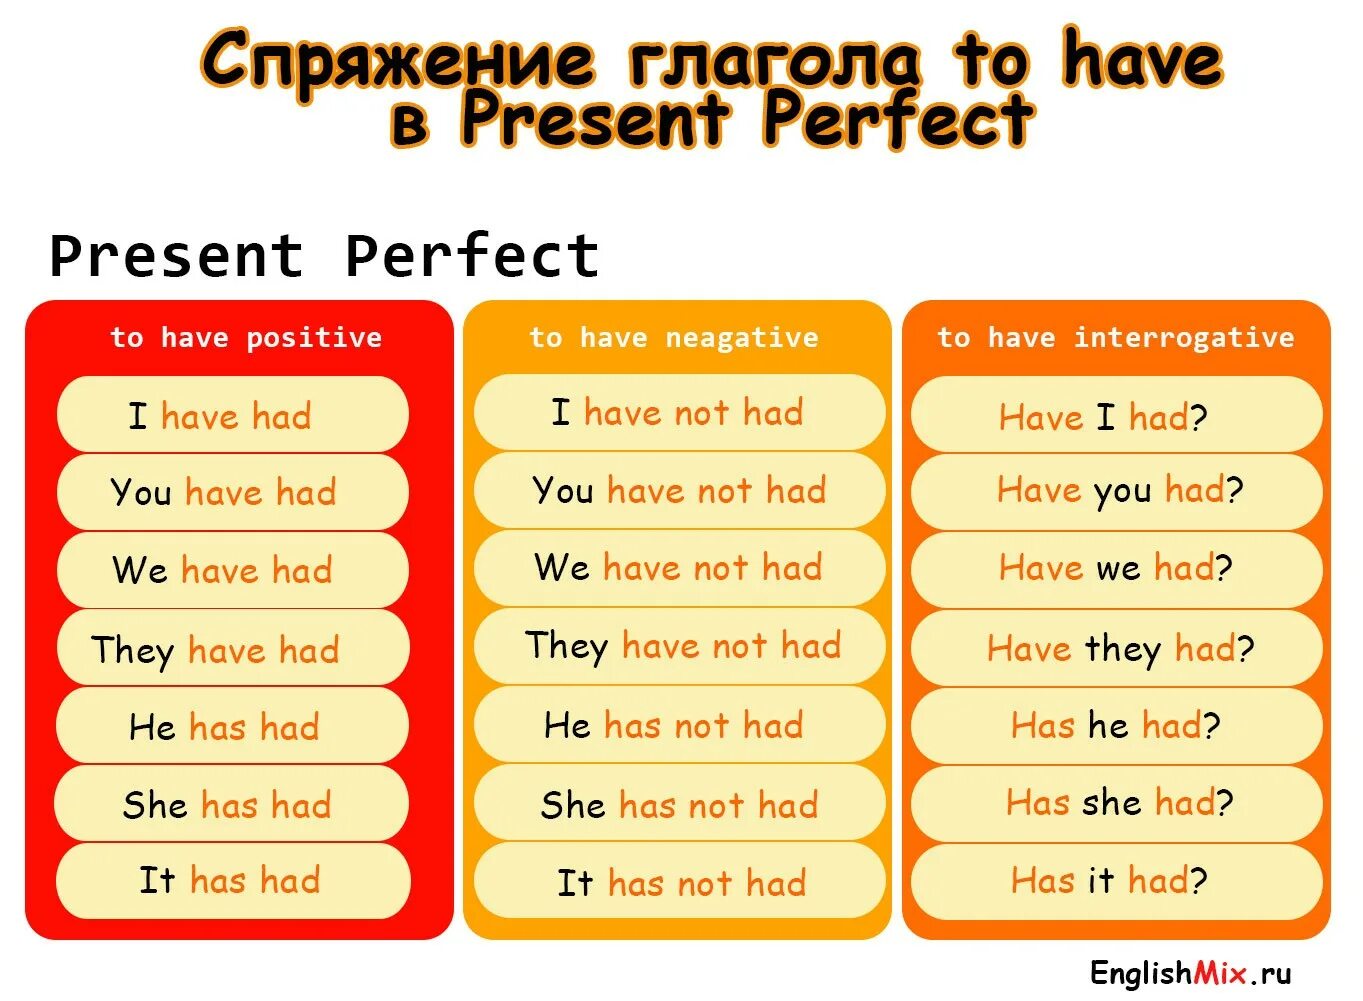 Глагол to have в present simple. Спряжение глагола have в present simple. To have present simple. Спряжение глагола to have в present simple. To have the s share